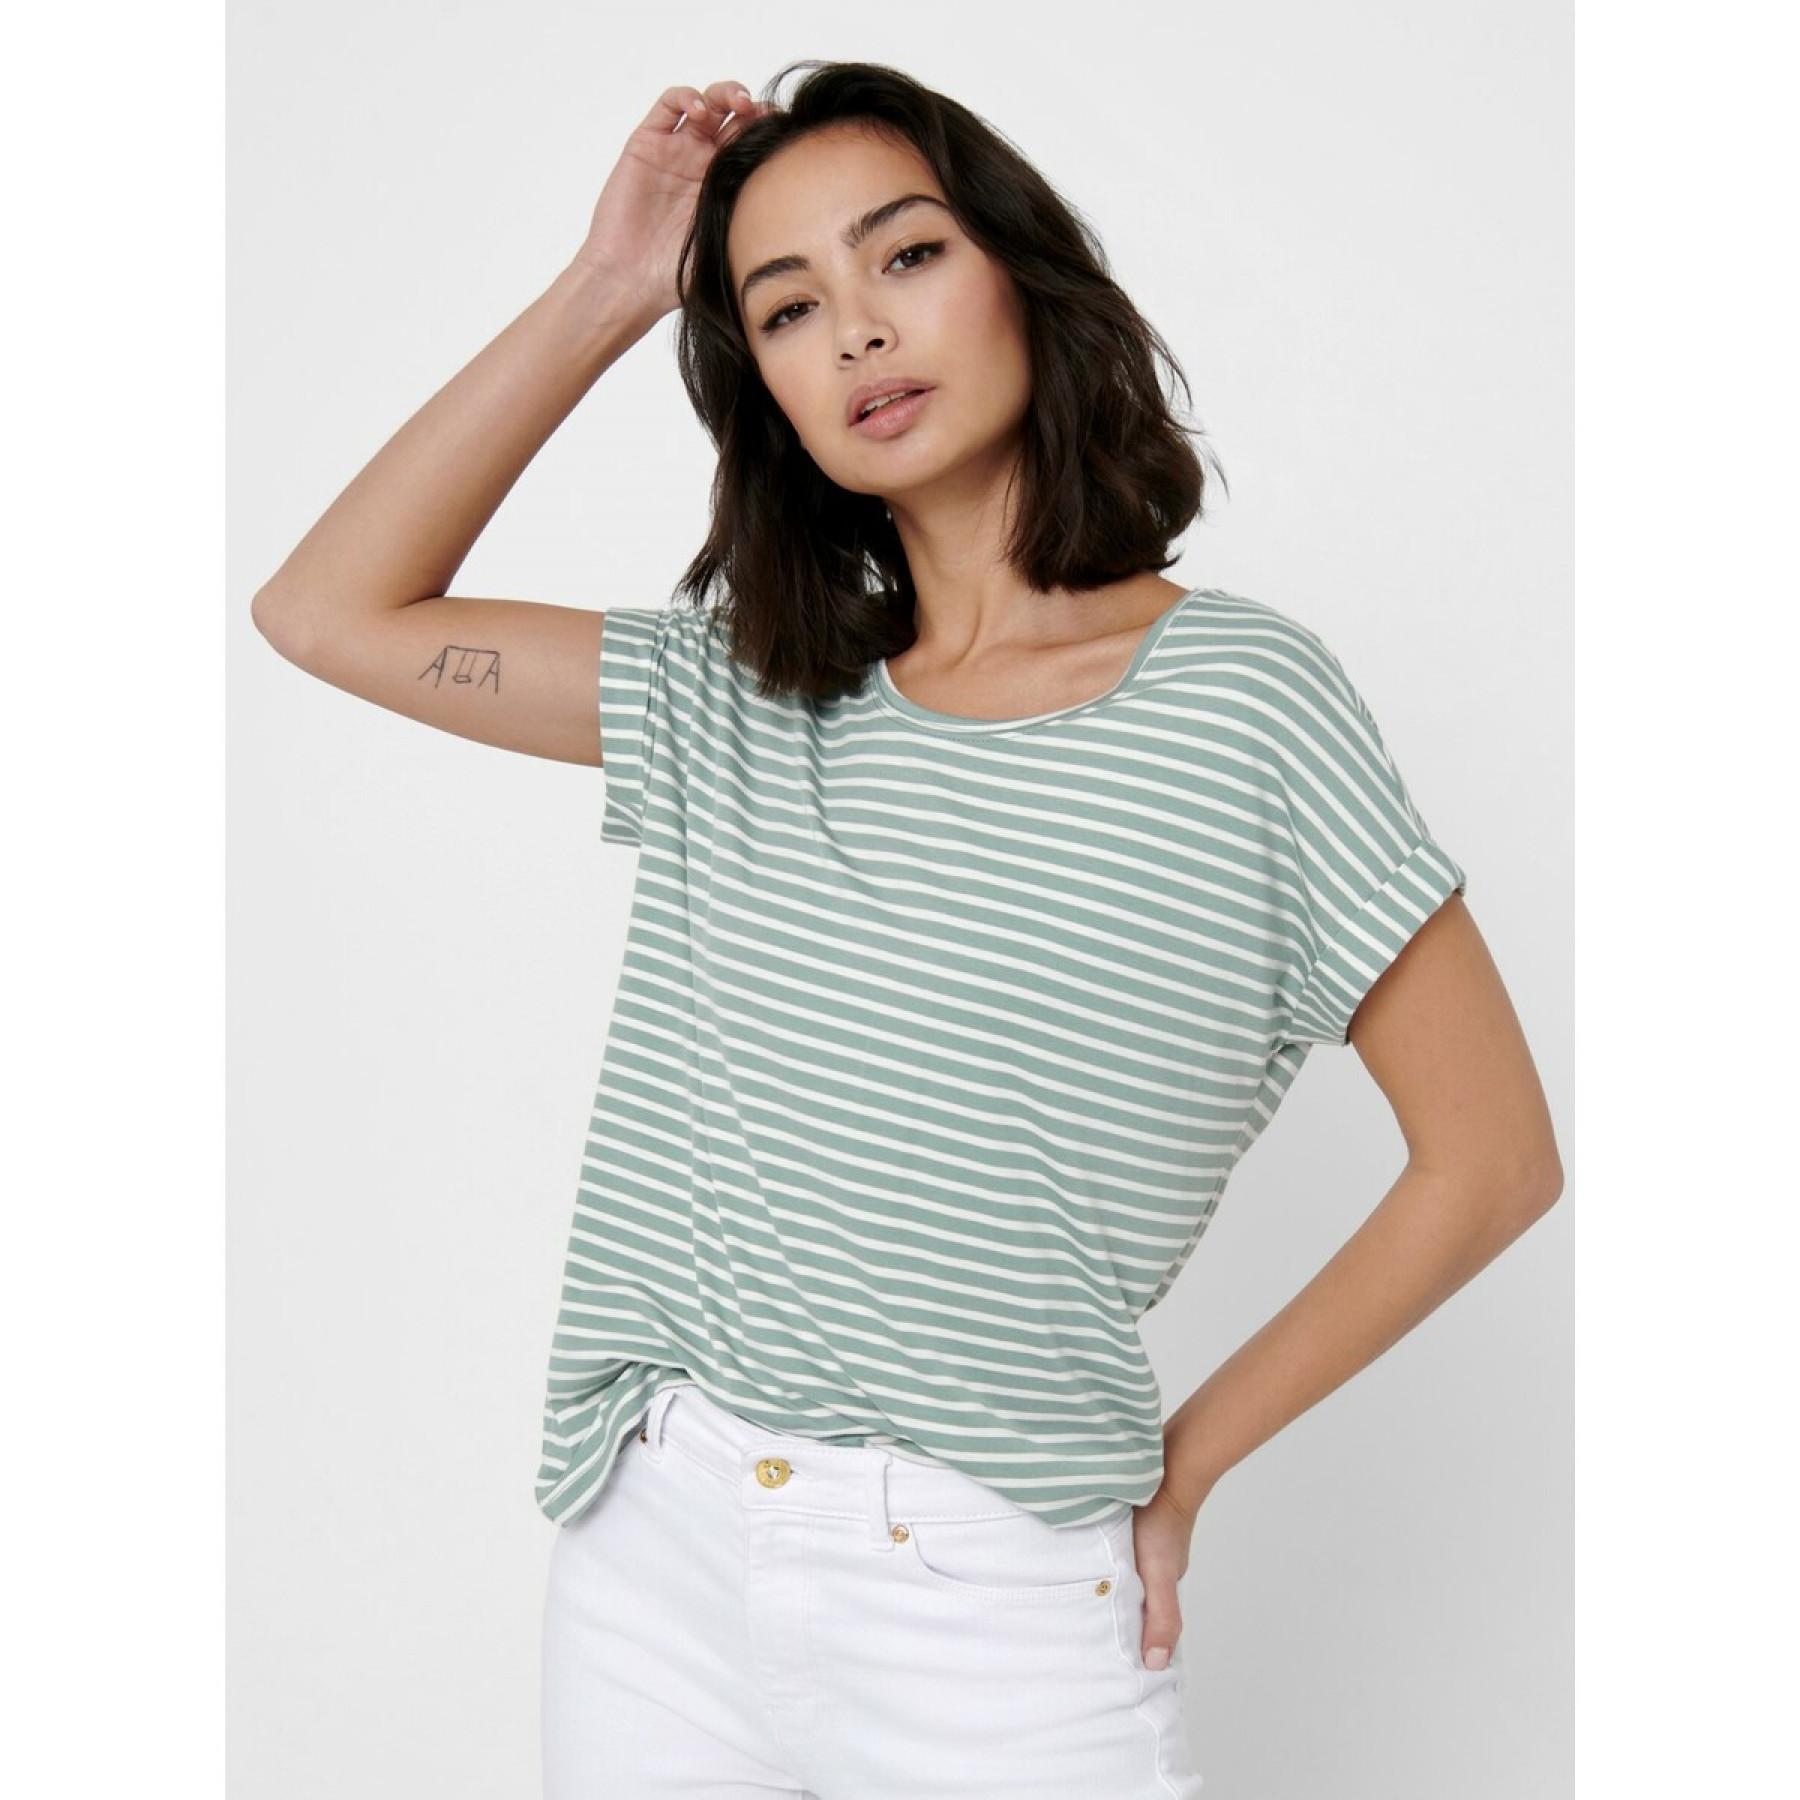 T-shirt donna Only Moster stripe Girocollo